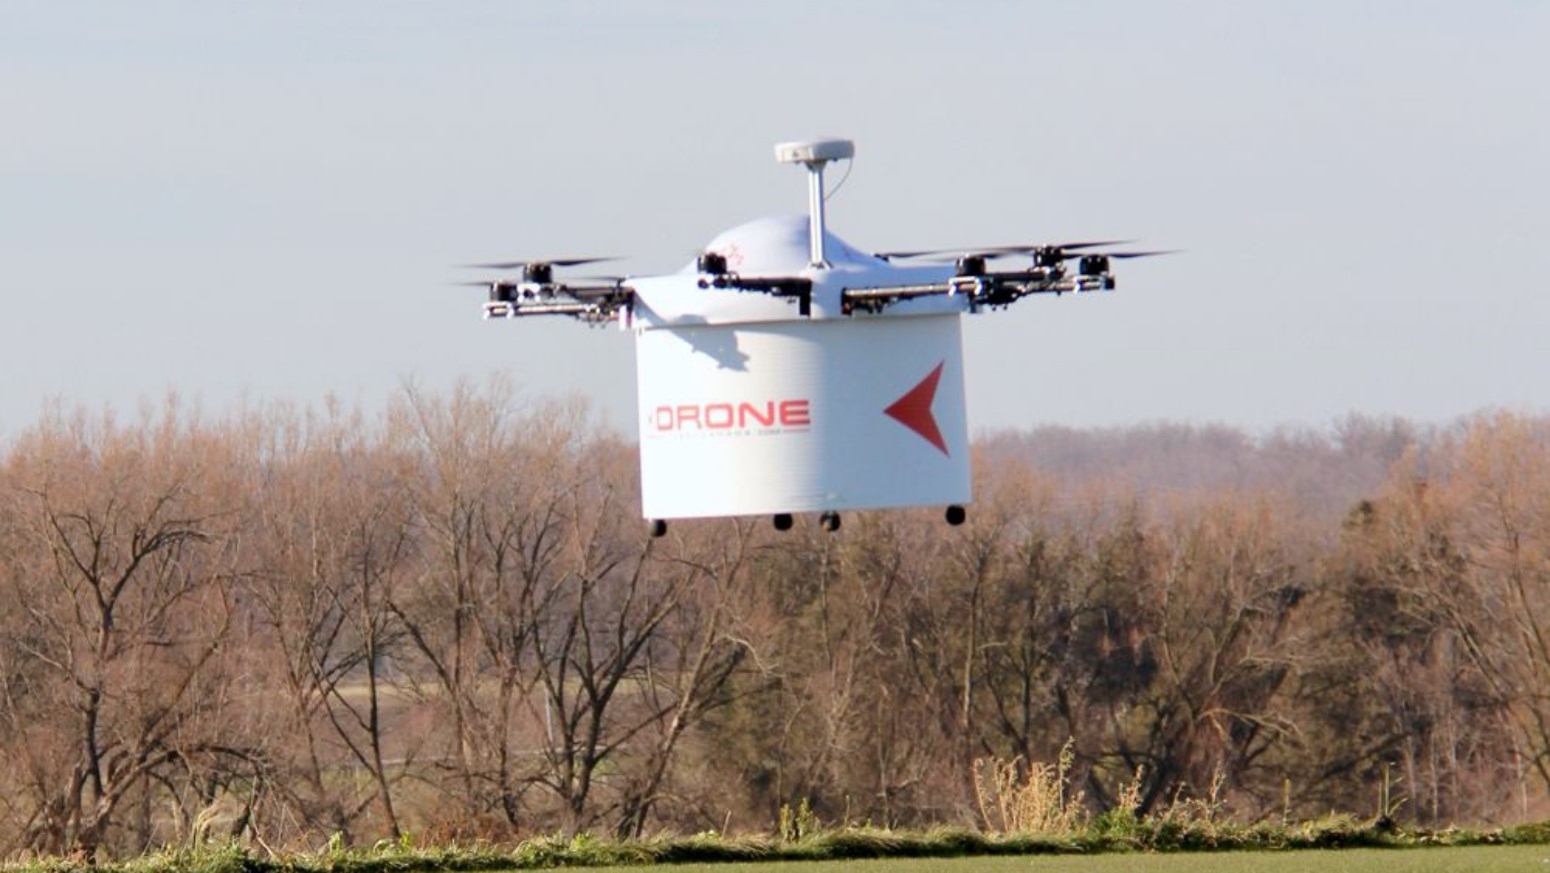 Drone can deliver an AED faster than ambulance